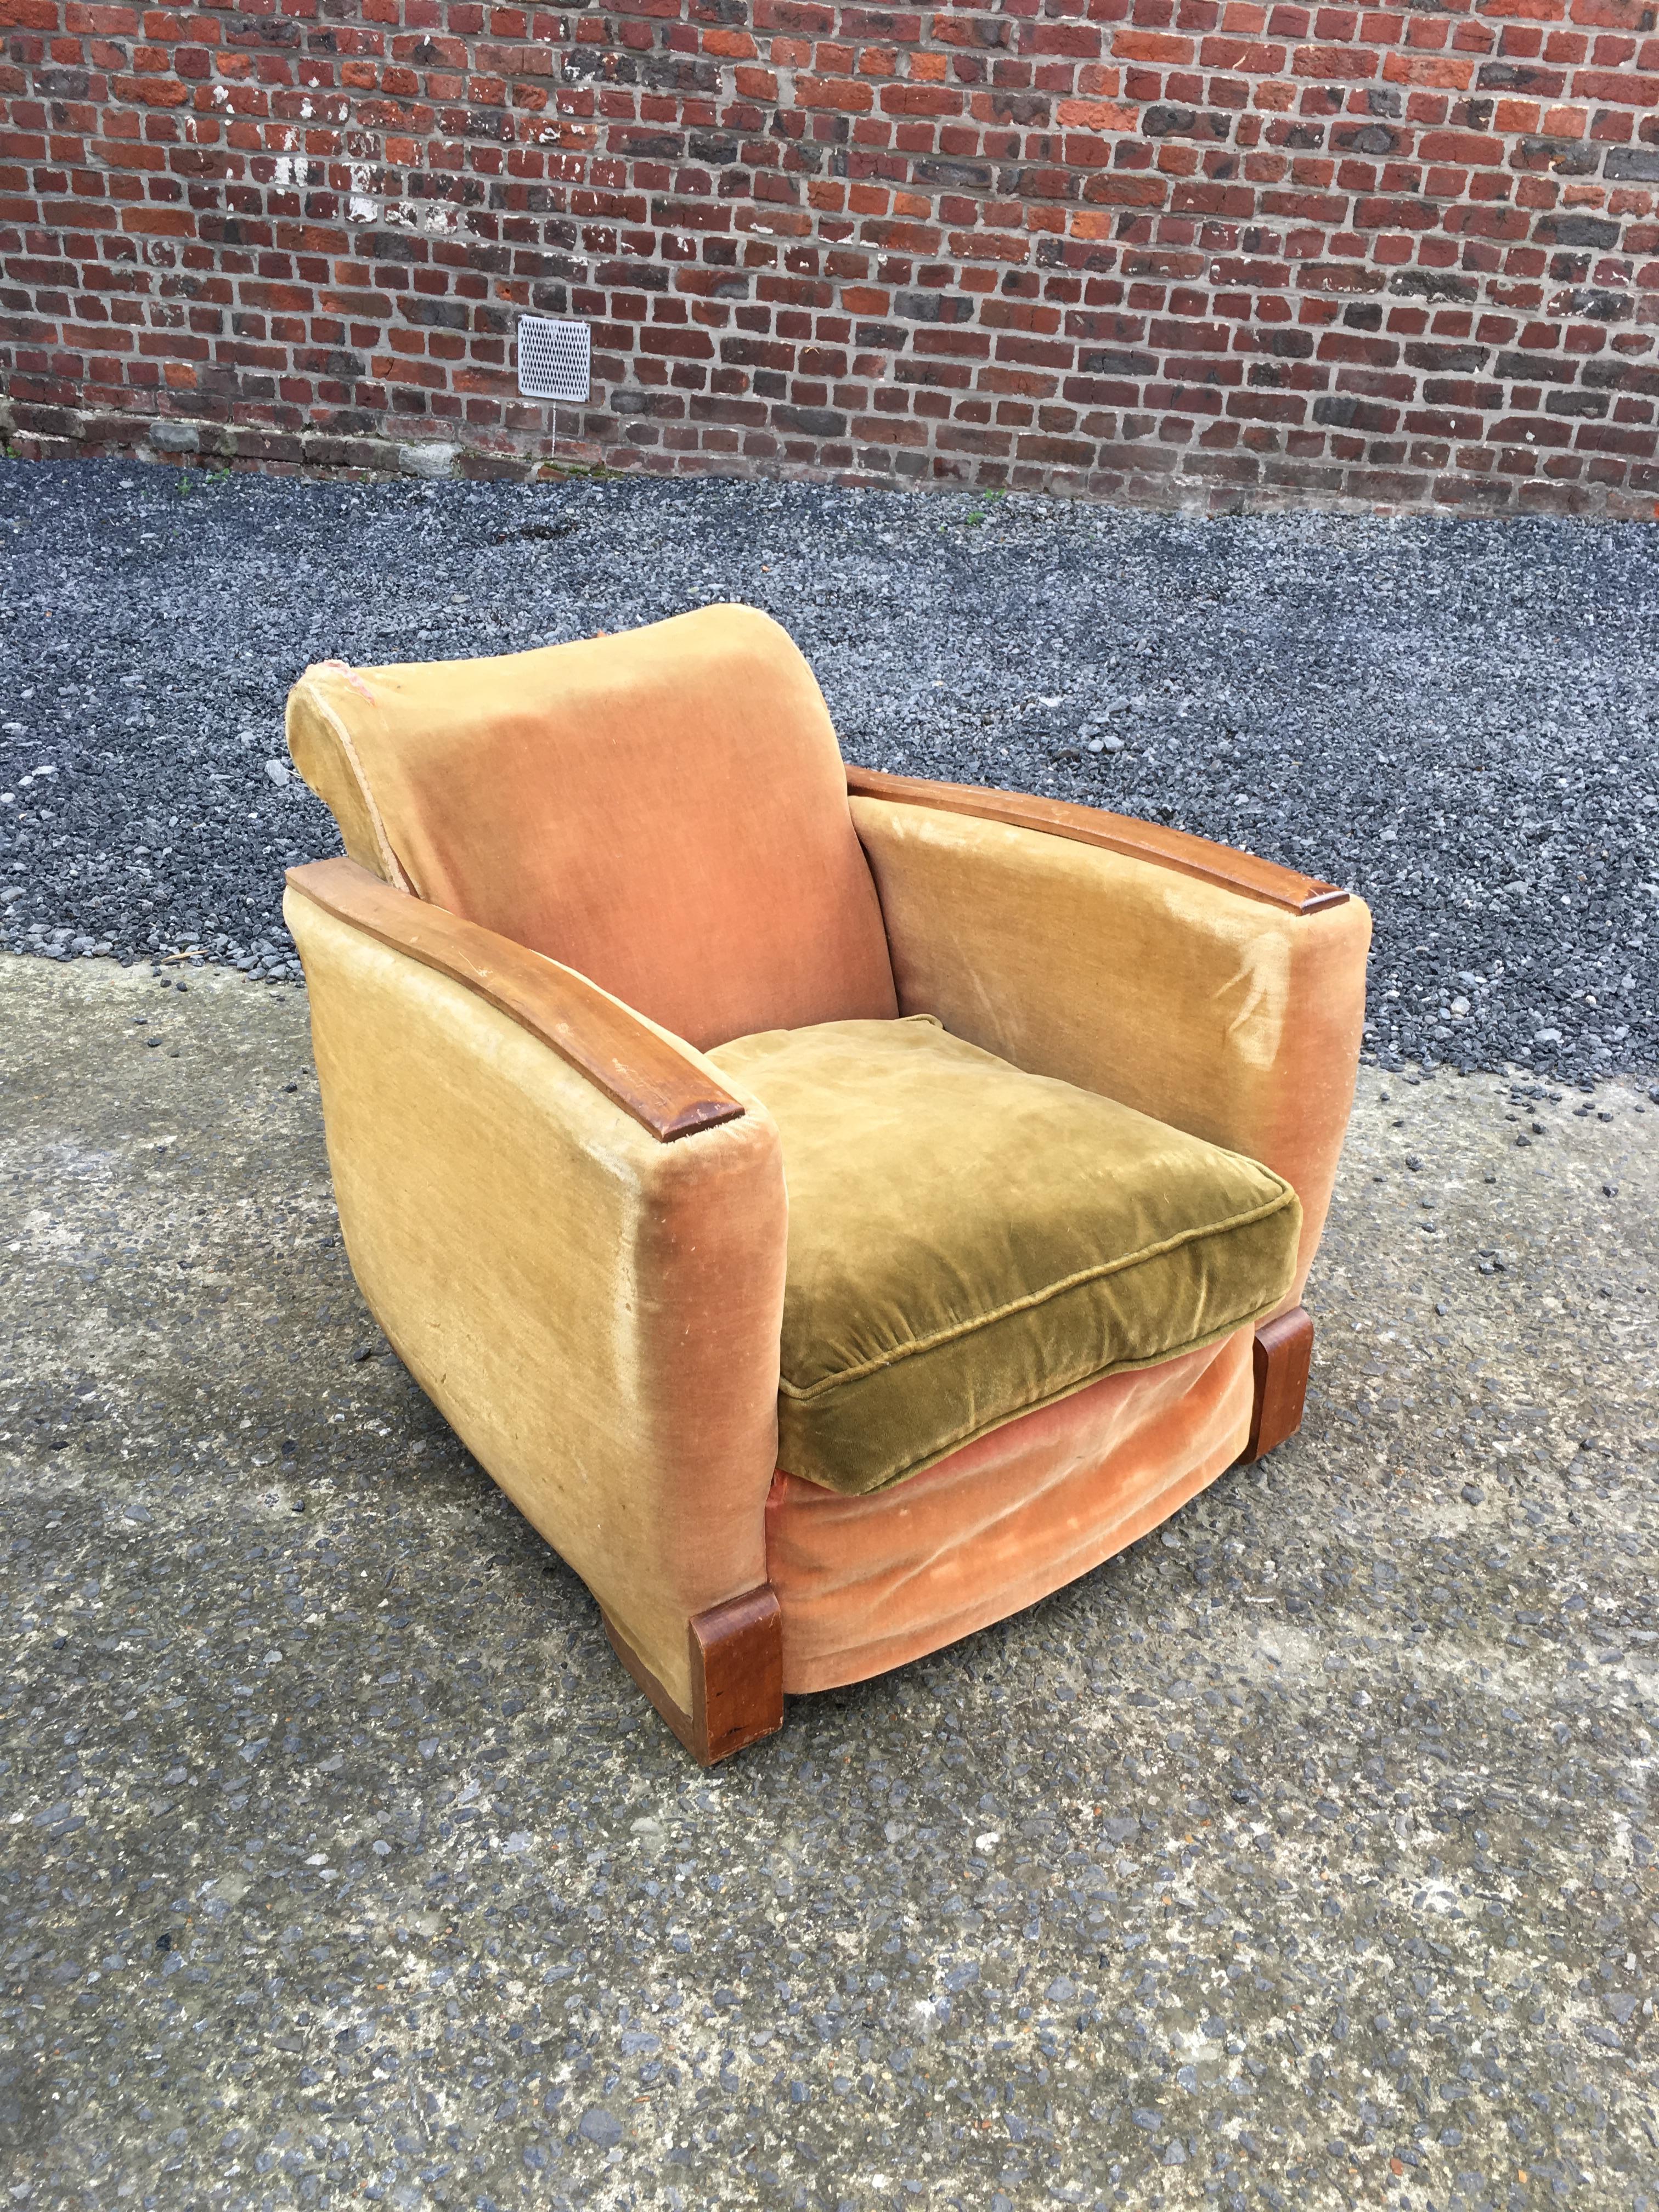 Art Deco mahogany armchair and its footrest, circa 1930
to be restored
Measures: stool 35 x 55 x 55 cm.